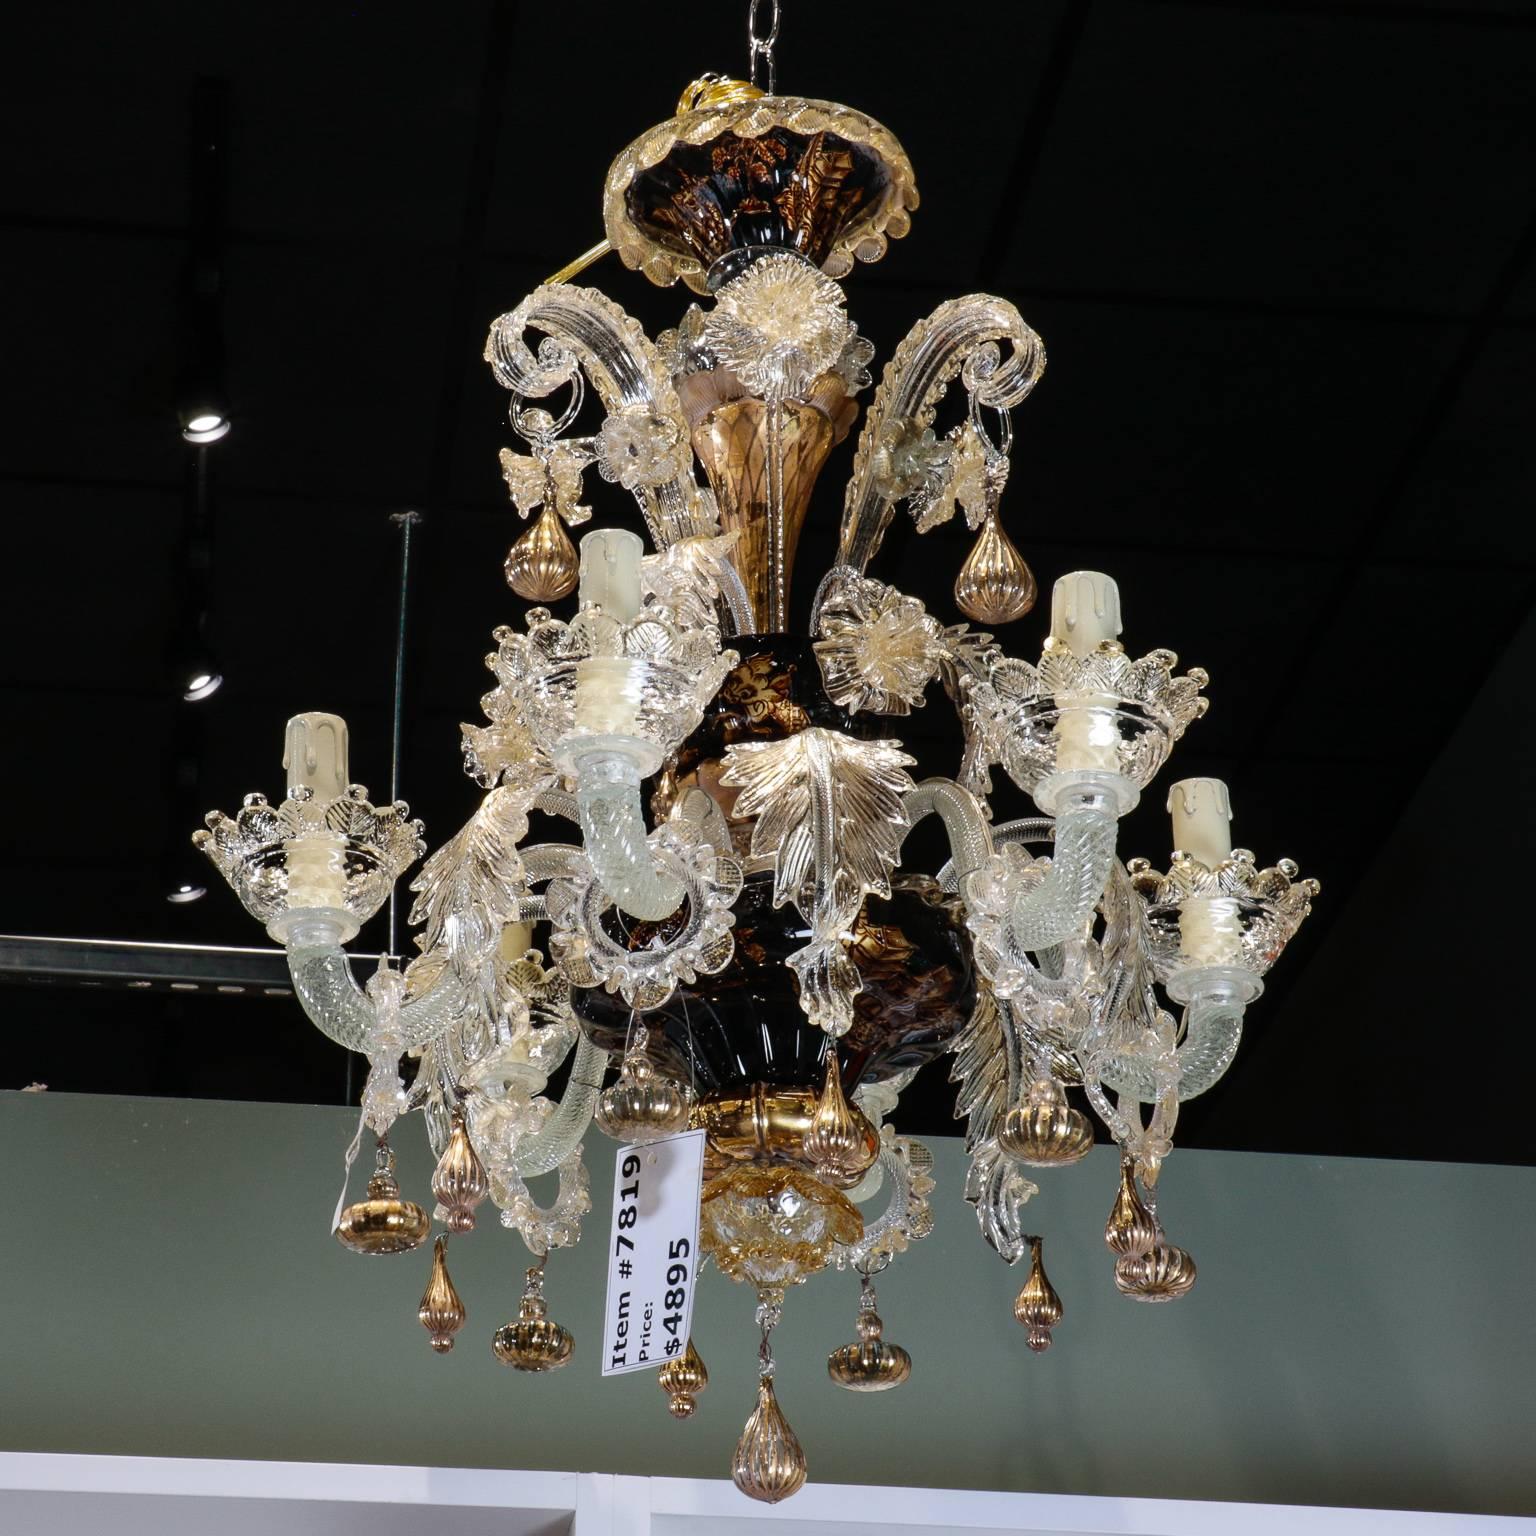 Venetian six-light chandelier in clear handblown glass accented with gold inclusion (gold dust) glass on bobeches, hanging tassel forms, leaves and ornamental pieces. Center support and canopy features hand blown glass bowls with Chinese motif